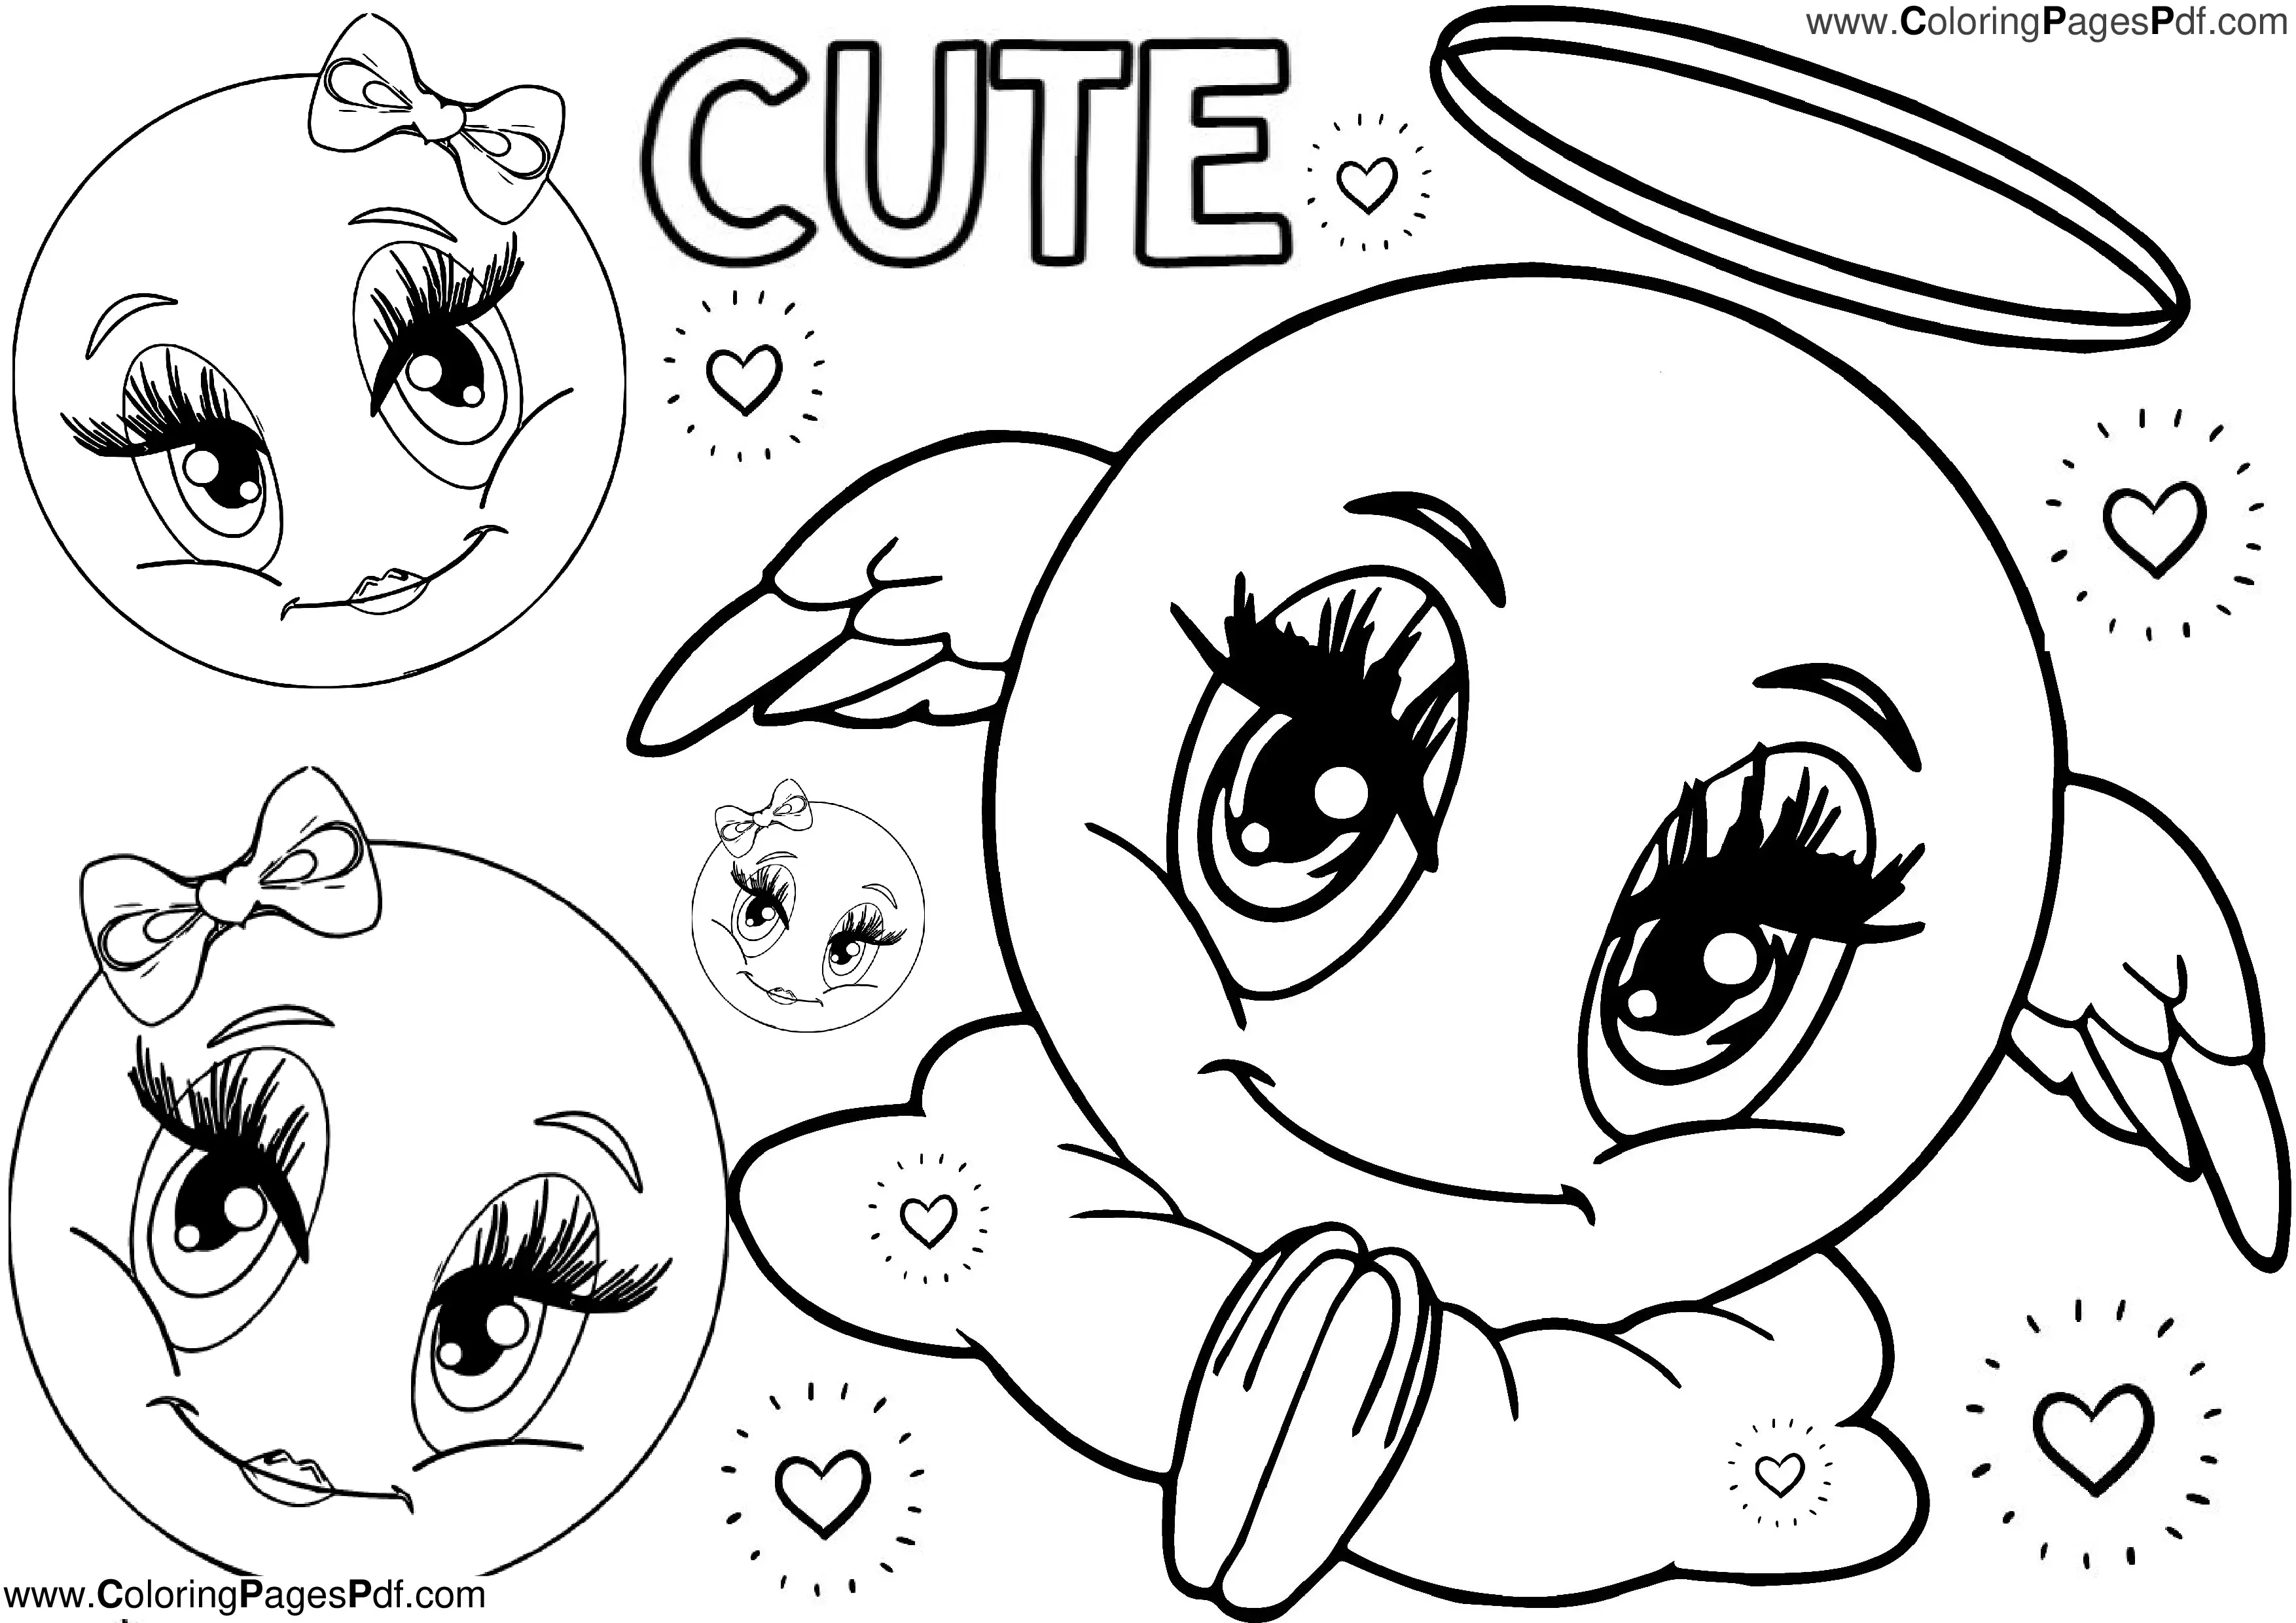 Emoji coloring pages for girls